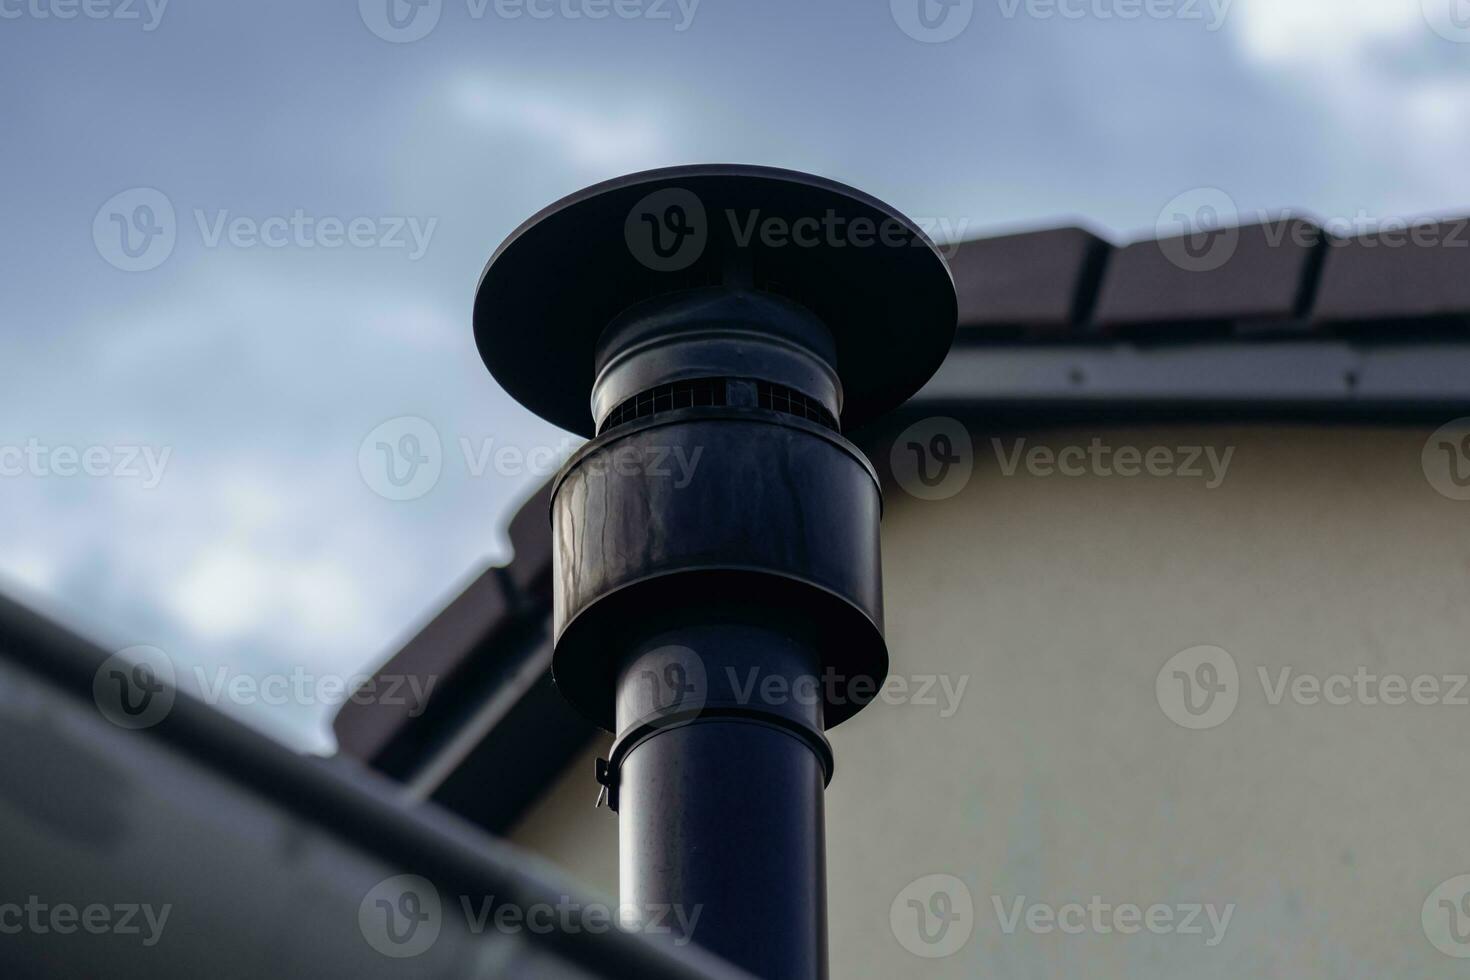 Chimney of a wood or pellet stove installed on the roof photo